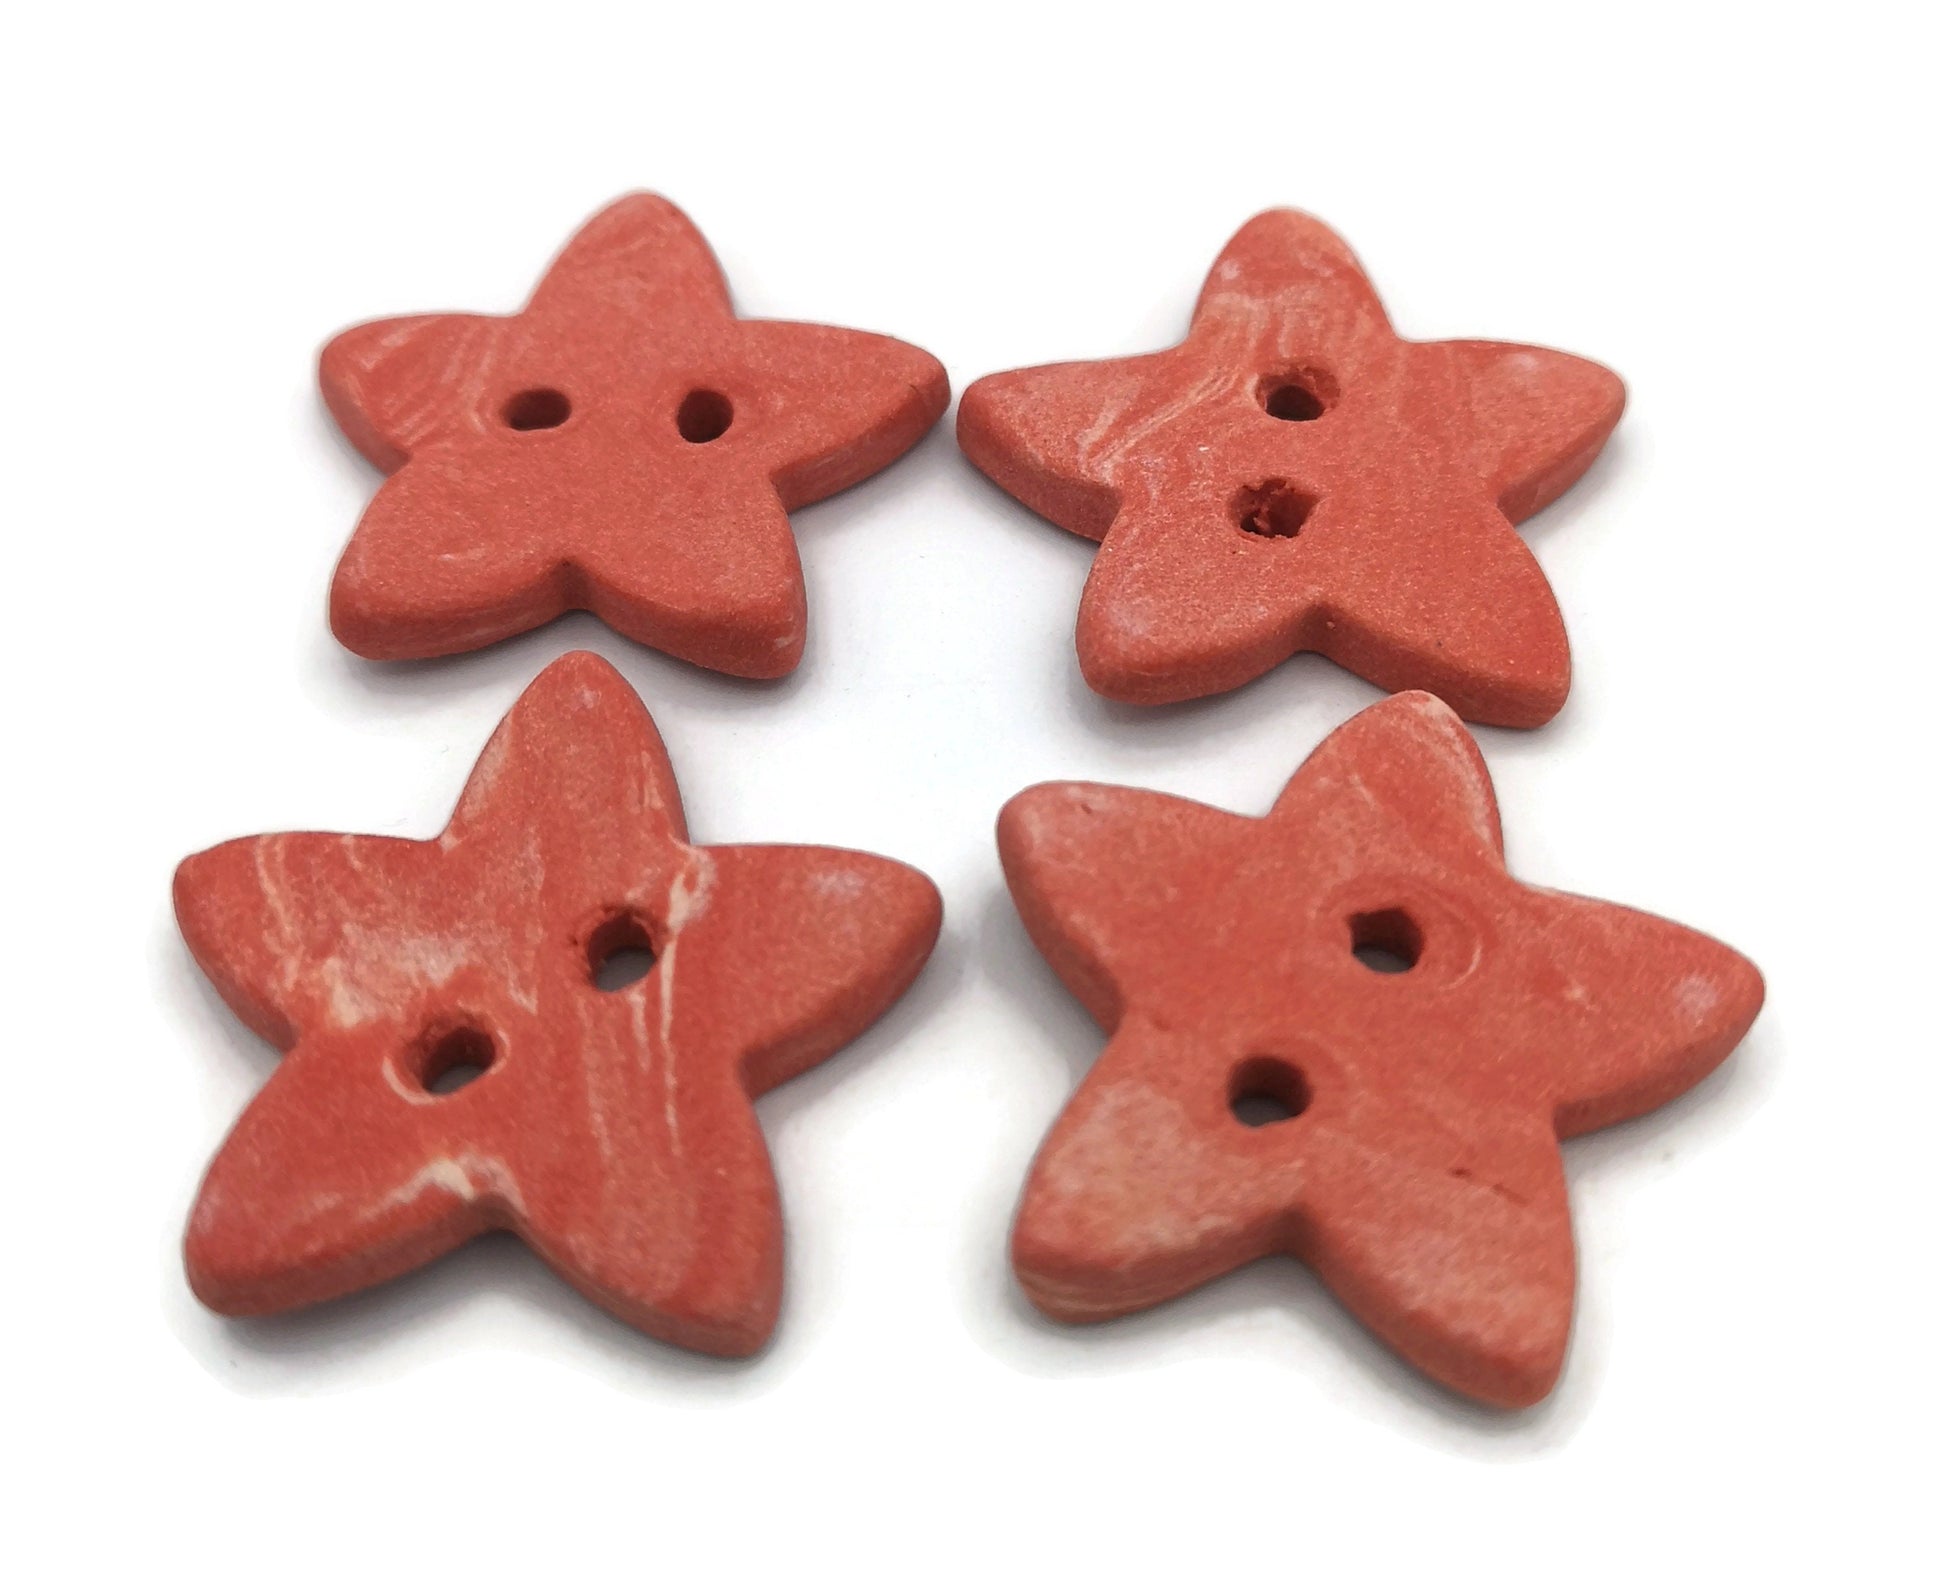 4Pc 25mm Handmade Ceramic Large Sewing Buttons Matte Red Star Shaped, Cute Sewing Supplies And Notions - Ceramica Ana Rafael